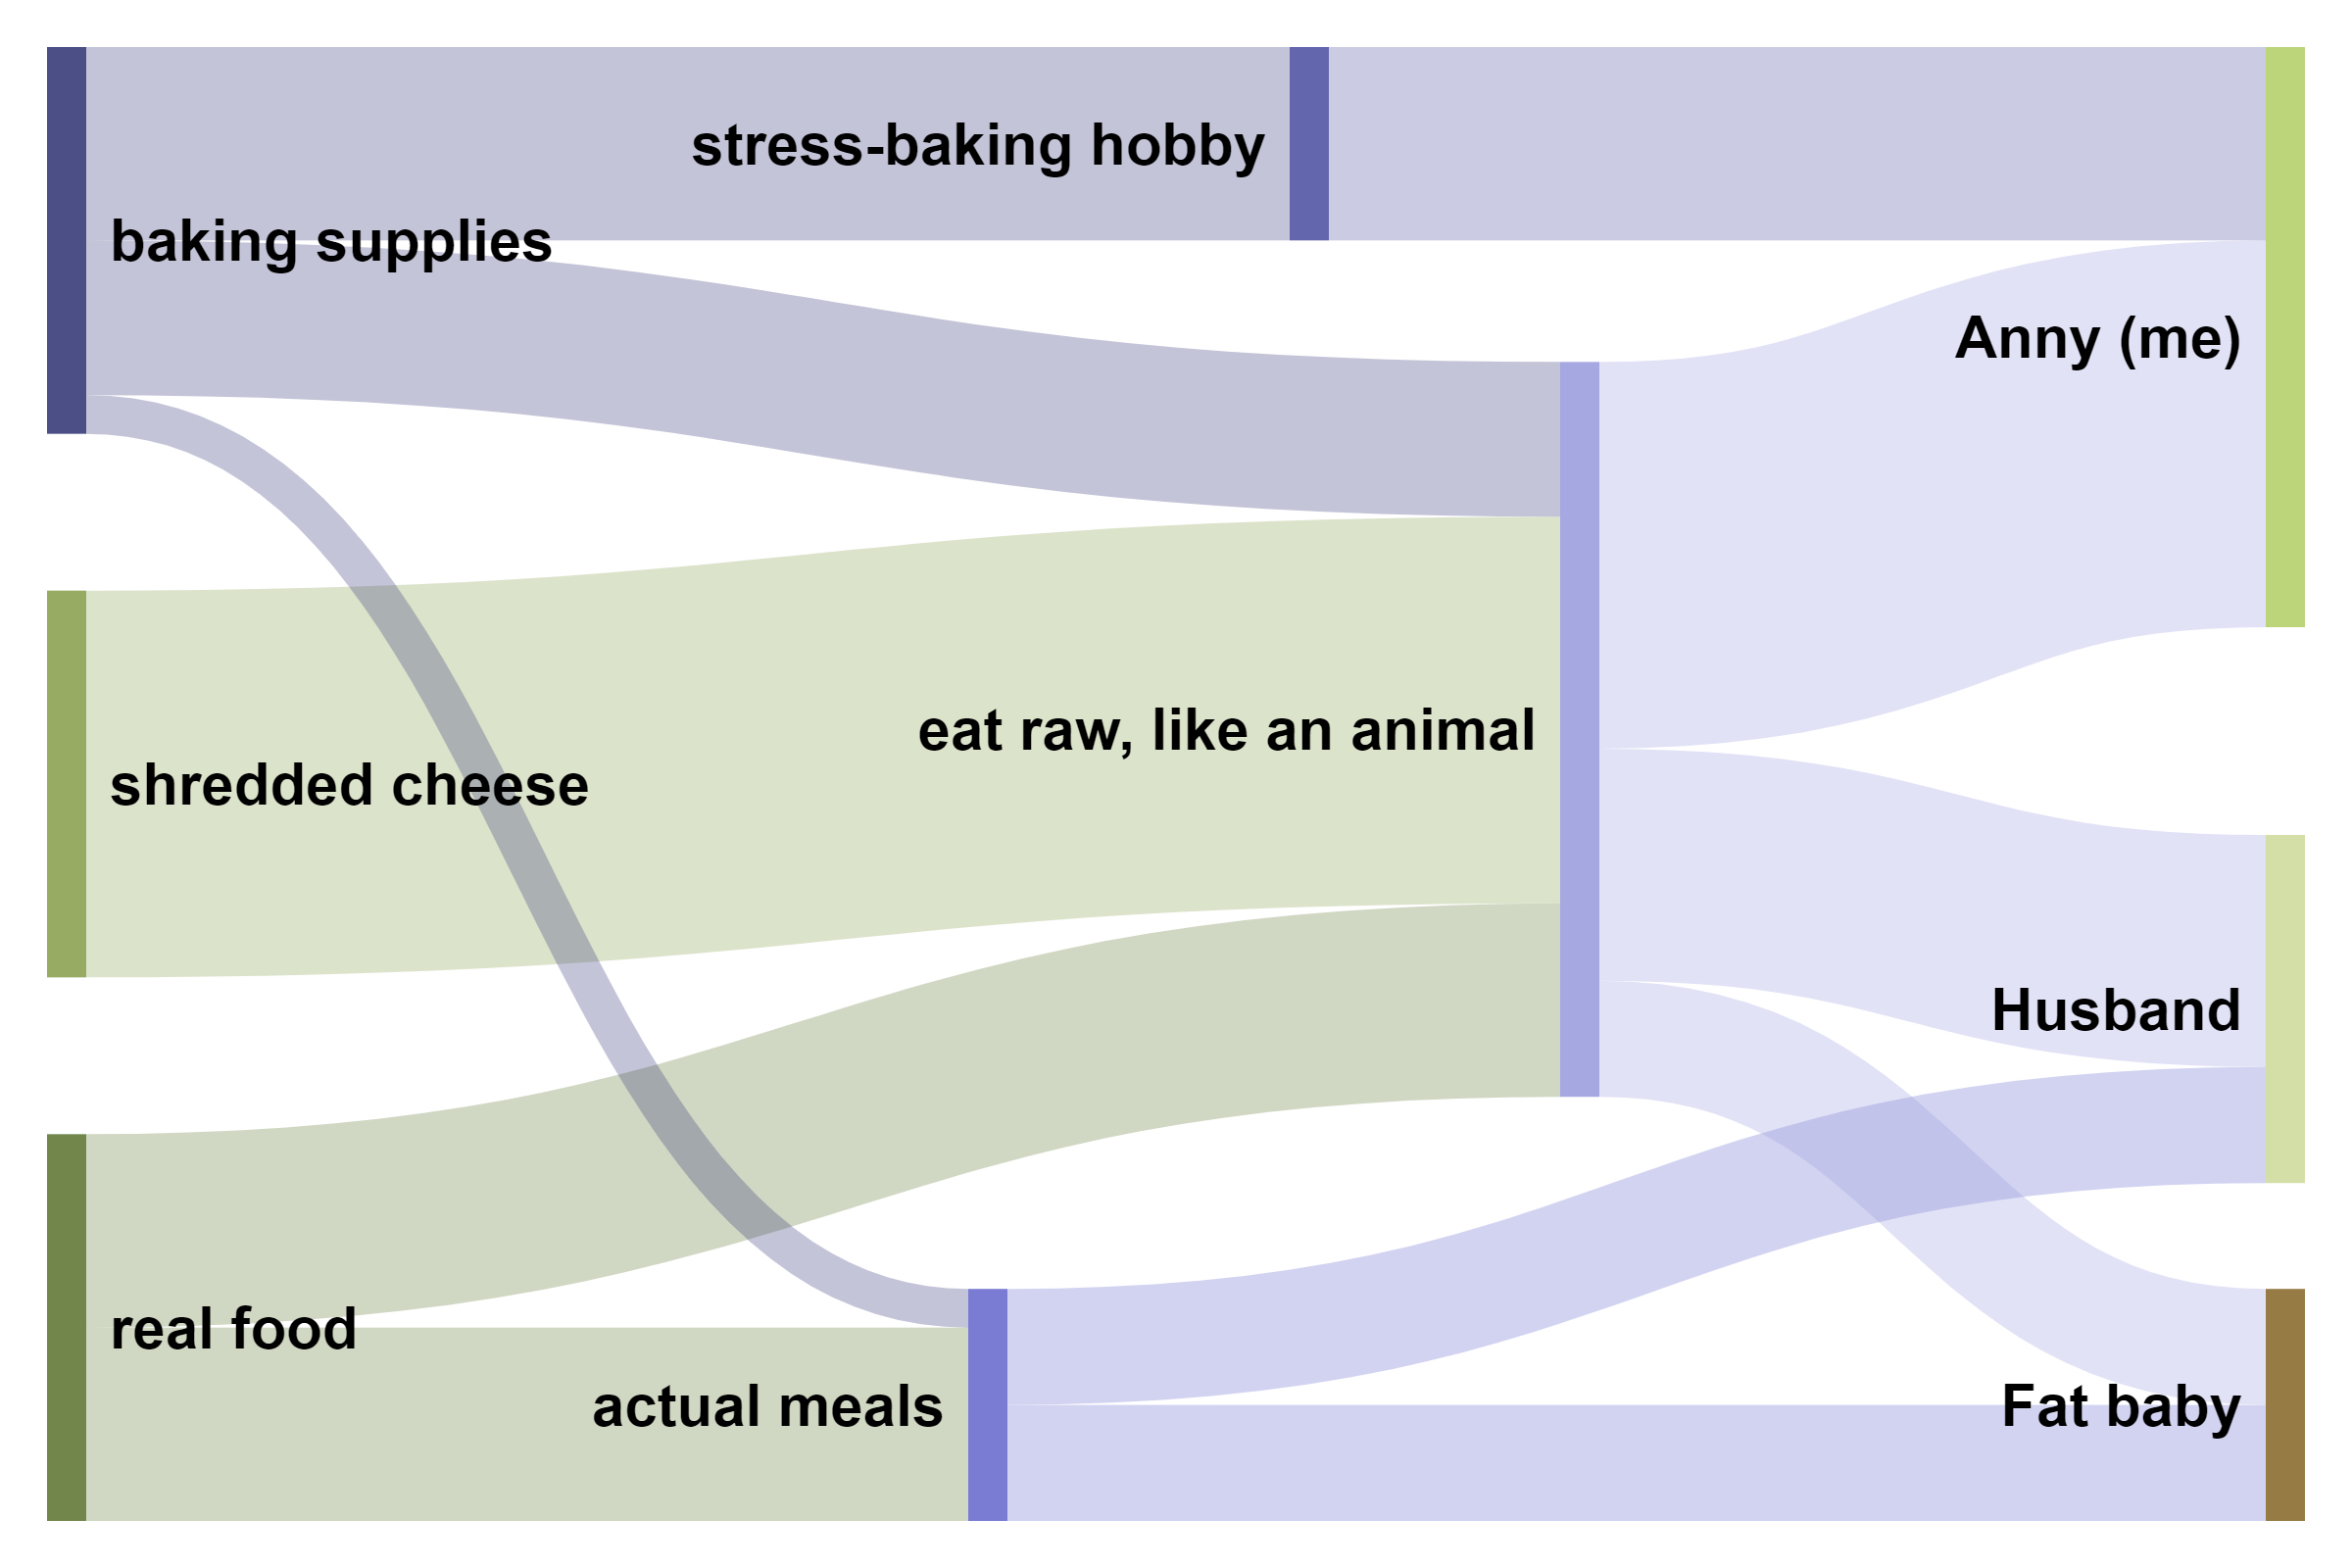 Sankey food diagram of shopping trends. Image by Anny Gano.